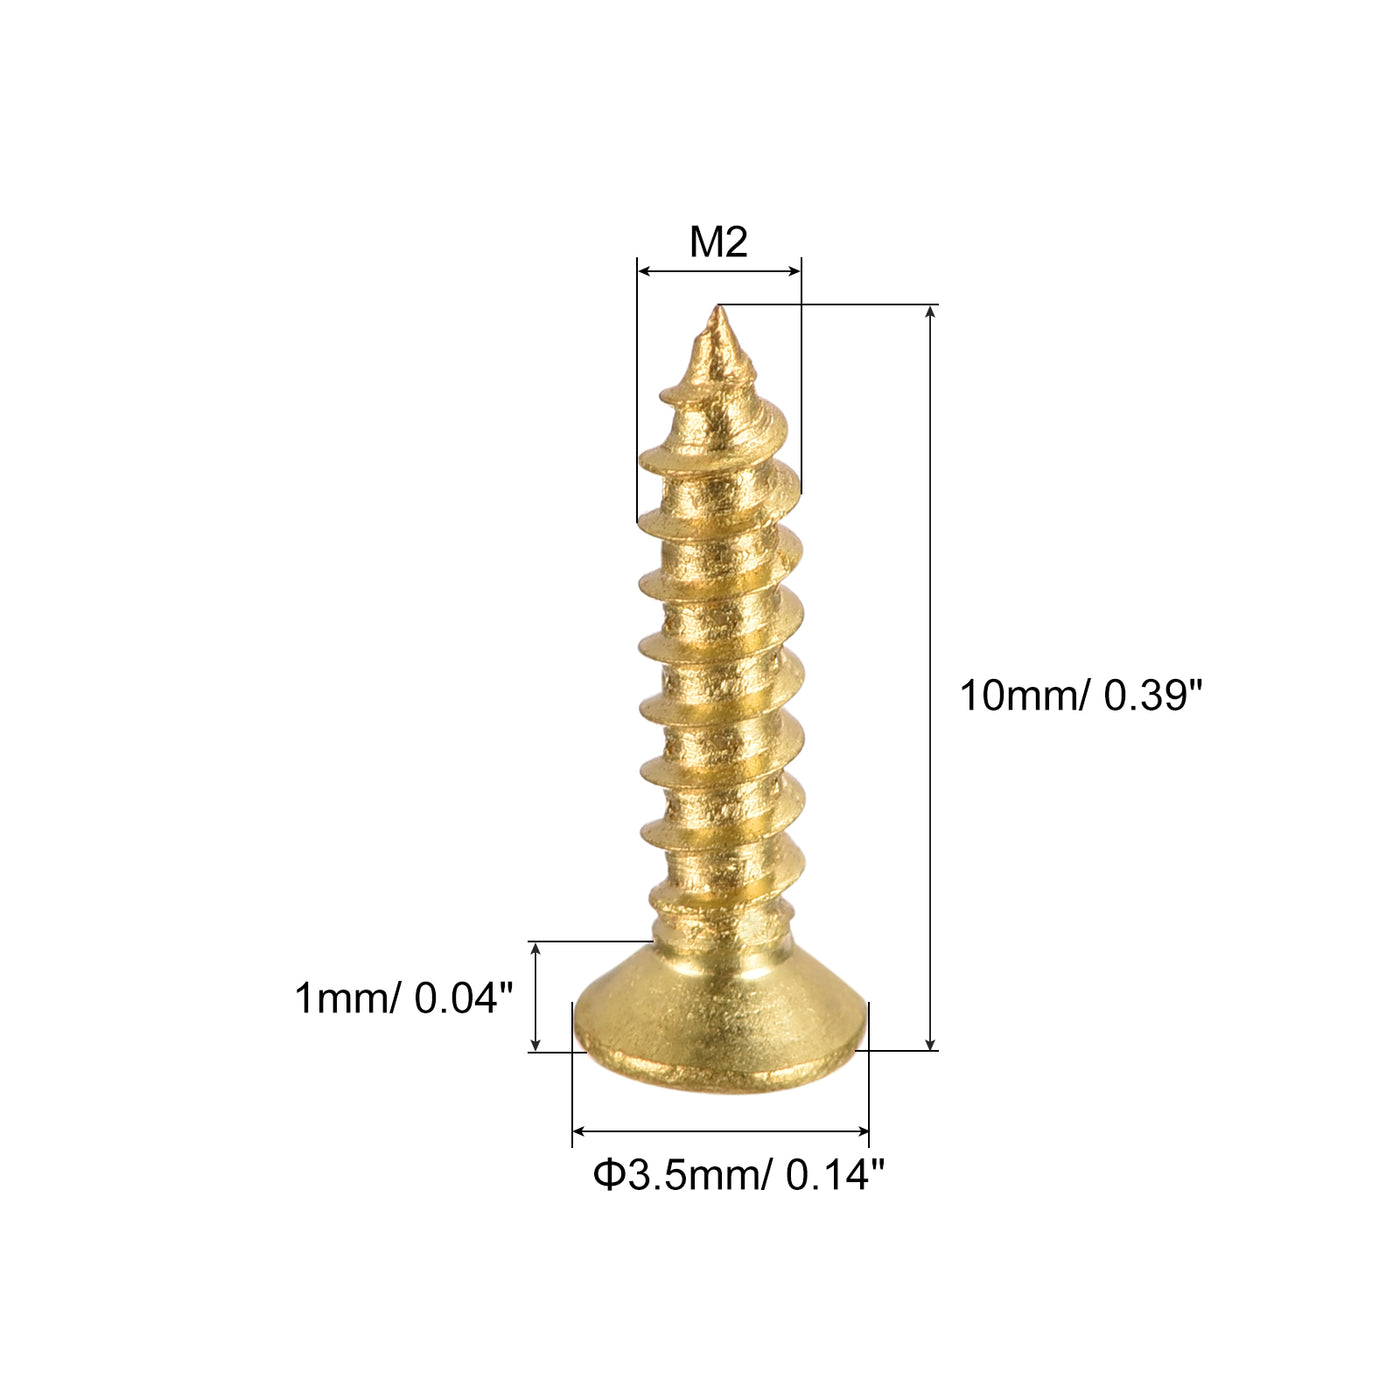 uxcell Uxcell Brass Wood Screws, M2x10mm Phillips Flat Head Self Tapping Connector for Door, Cabinet, Wooden Furniture 25Pcs